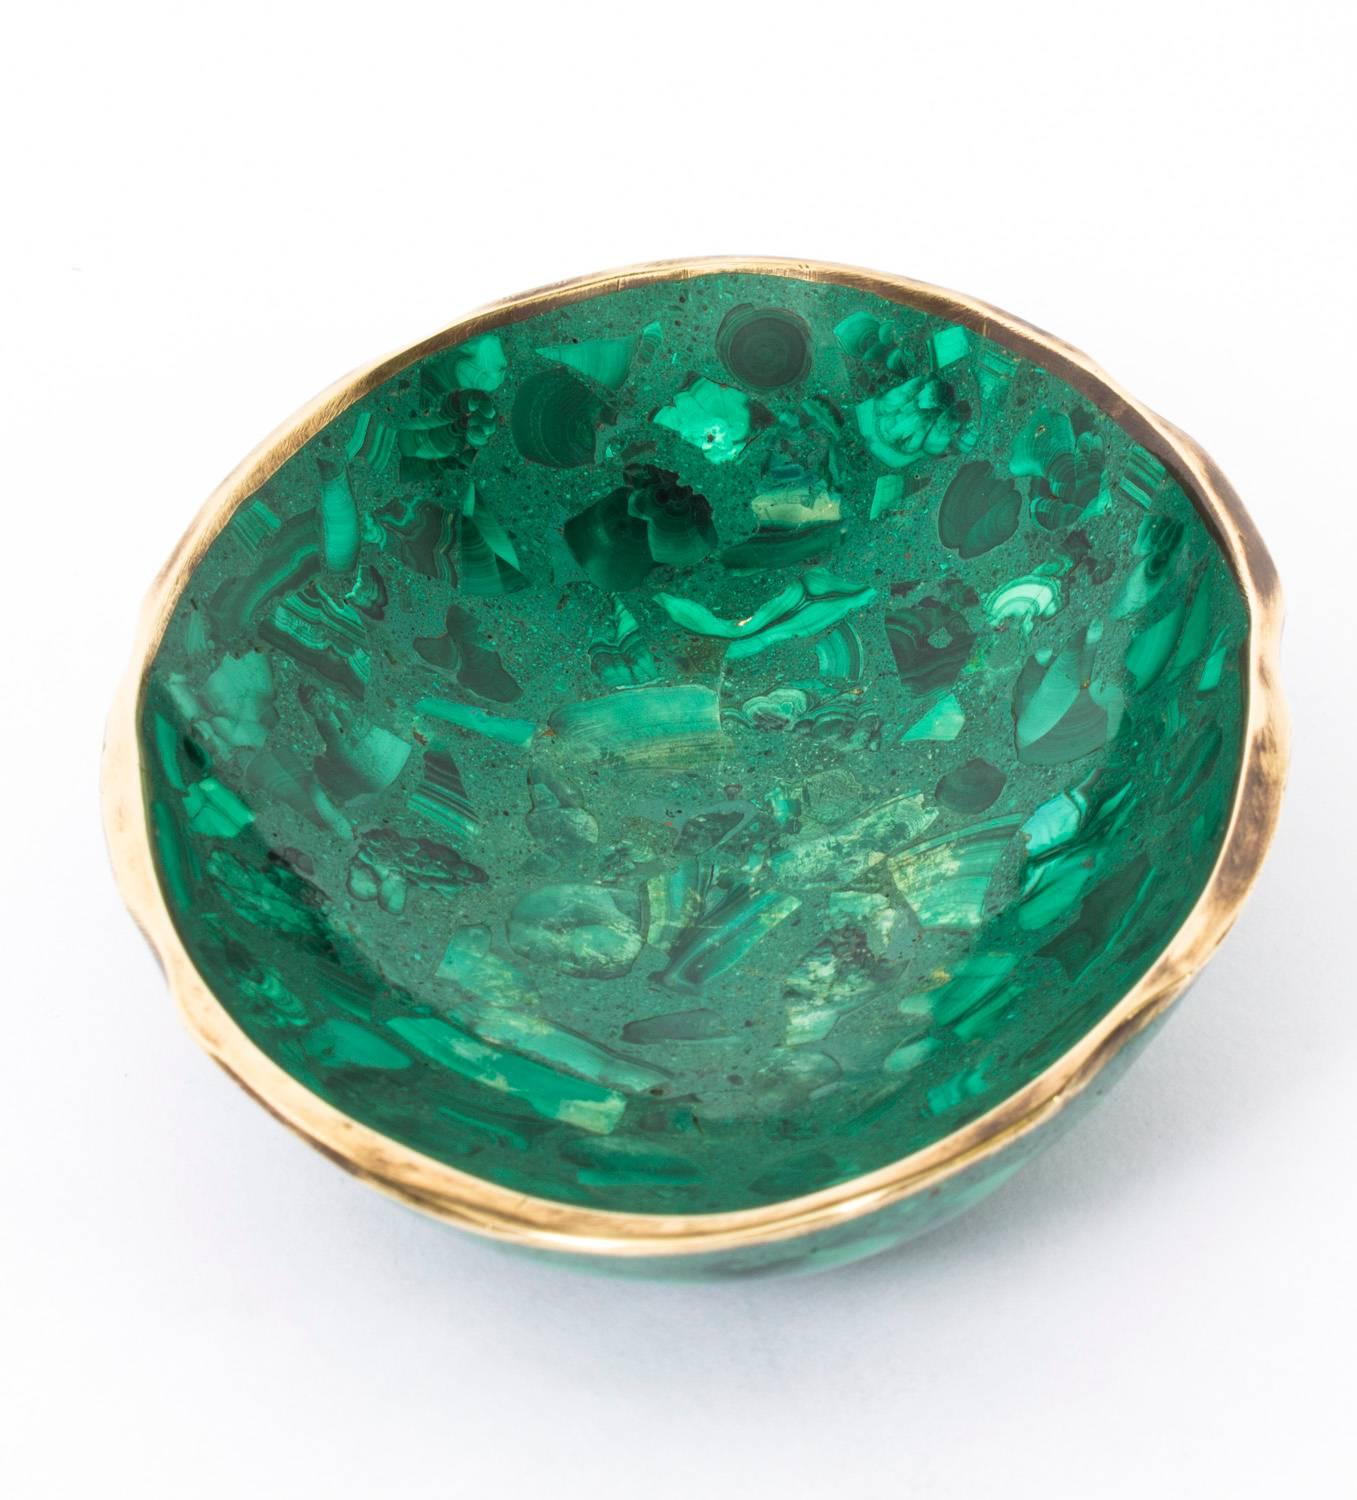 This is a beautiful oval malachite trinket dish circa 1900 in date.

The shallow dish features the distinctive textured pattern of malachite with an ormolu mount finishing off the lip.

Provenance: 
The collection of the late Ronnie Kirkwood